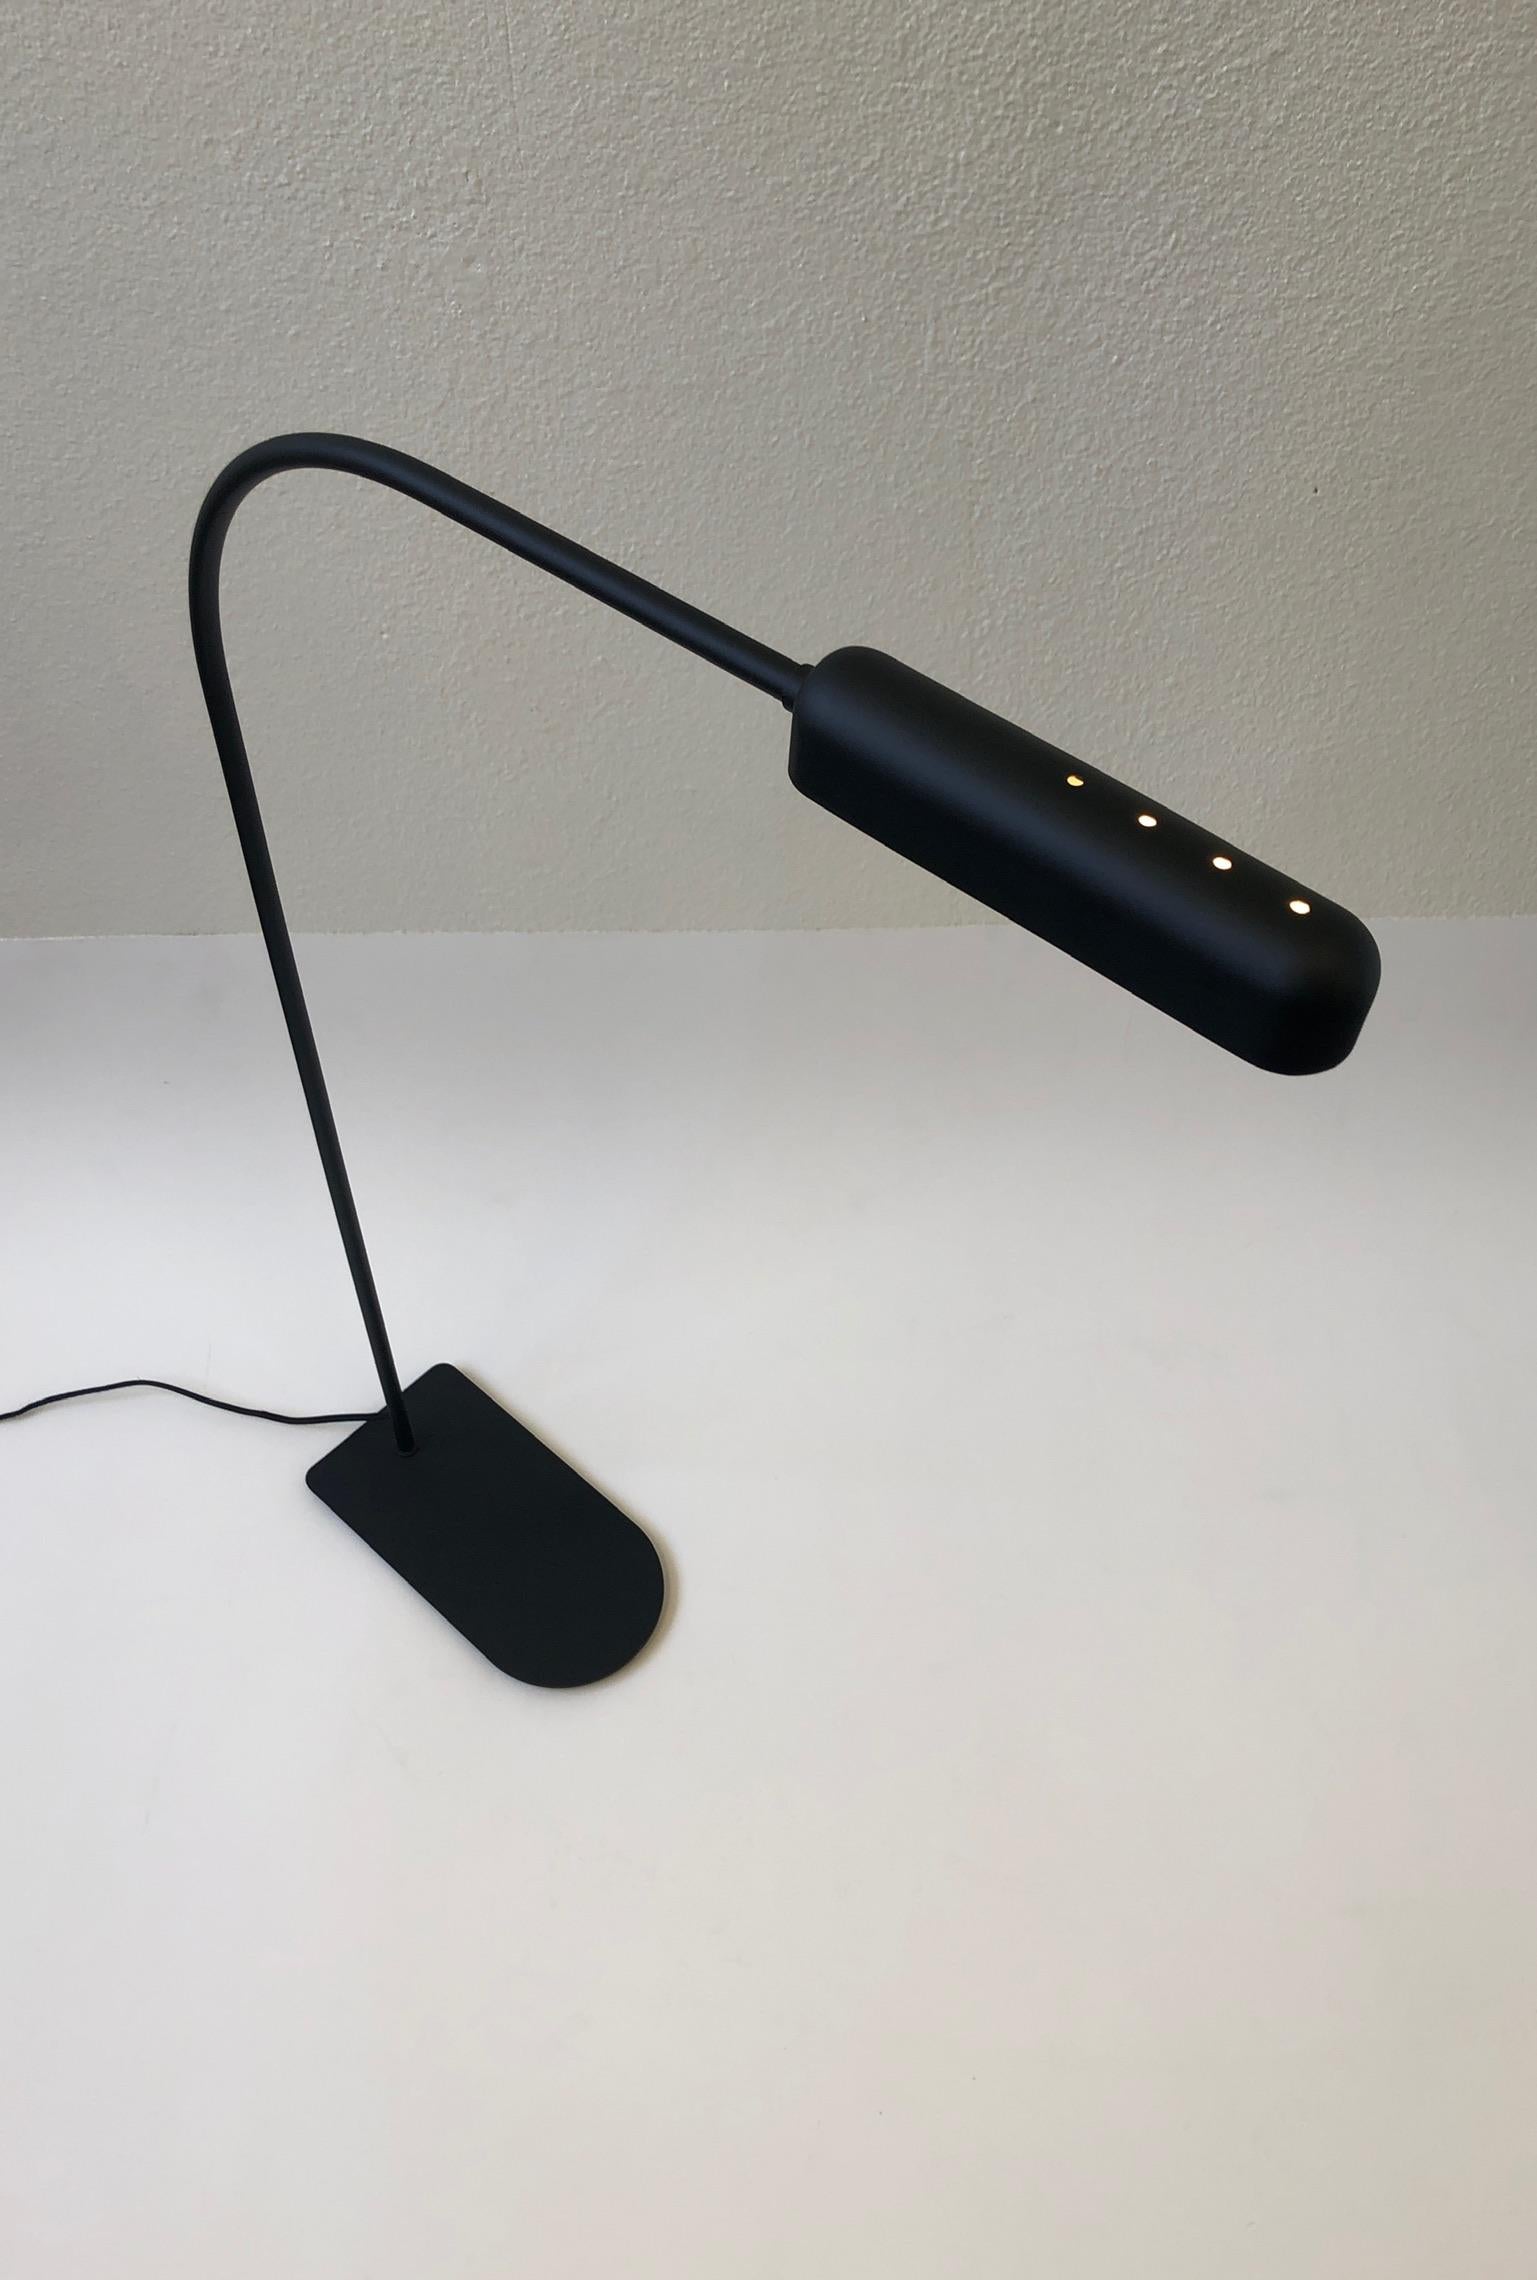 A rare 1980s satin black reading floor lamp by Ron Rezek. The lamp is in excellent condition. Newly rewired with black cloth cord. The lamp has a full range dimmer. It takes a 60 watt bulb since the shade just sits on top of the bulb.
Overall